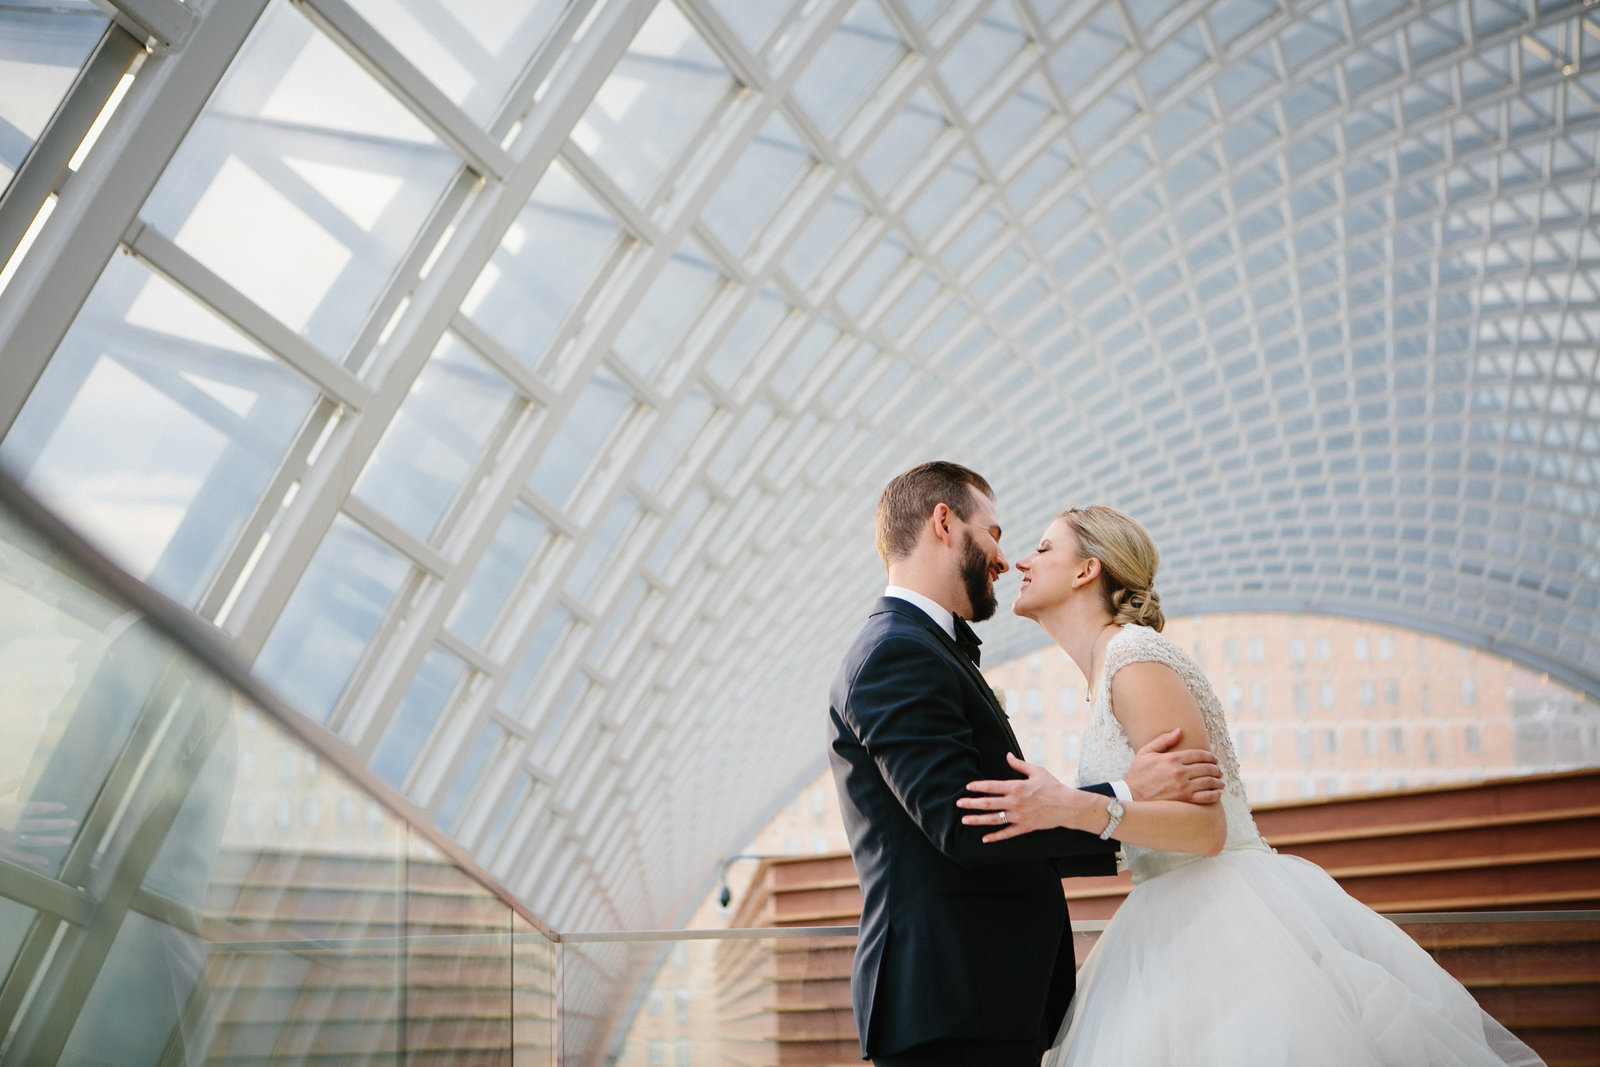 Gorgeous shot of the bride and groom at the Kimmel Center in Center City, Philadelphia.